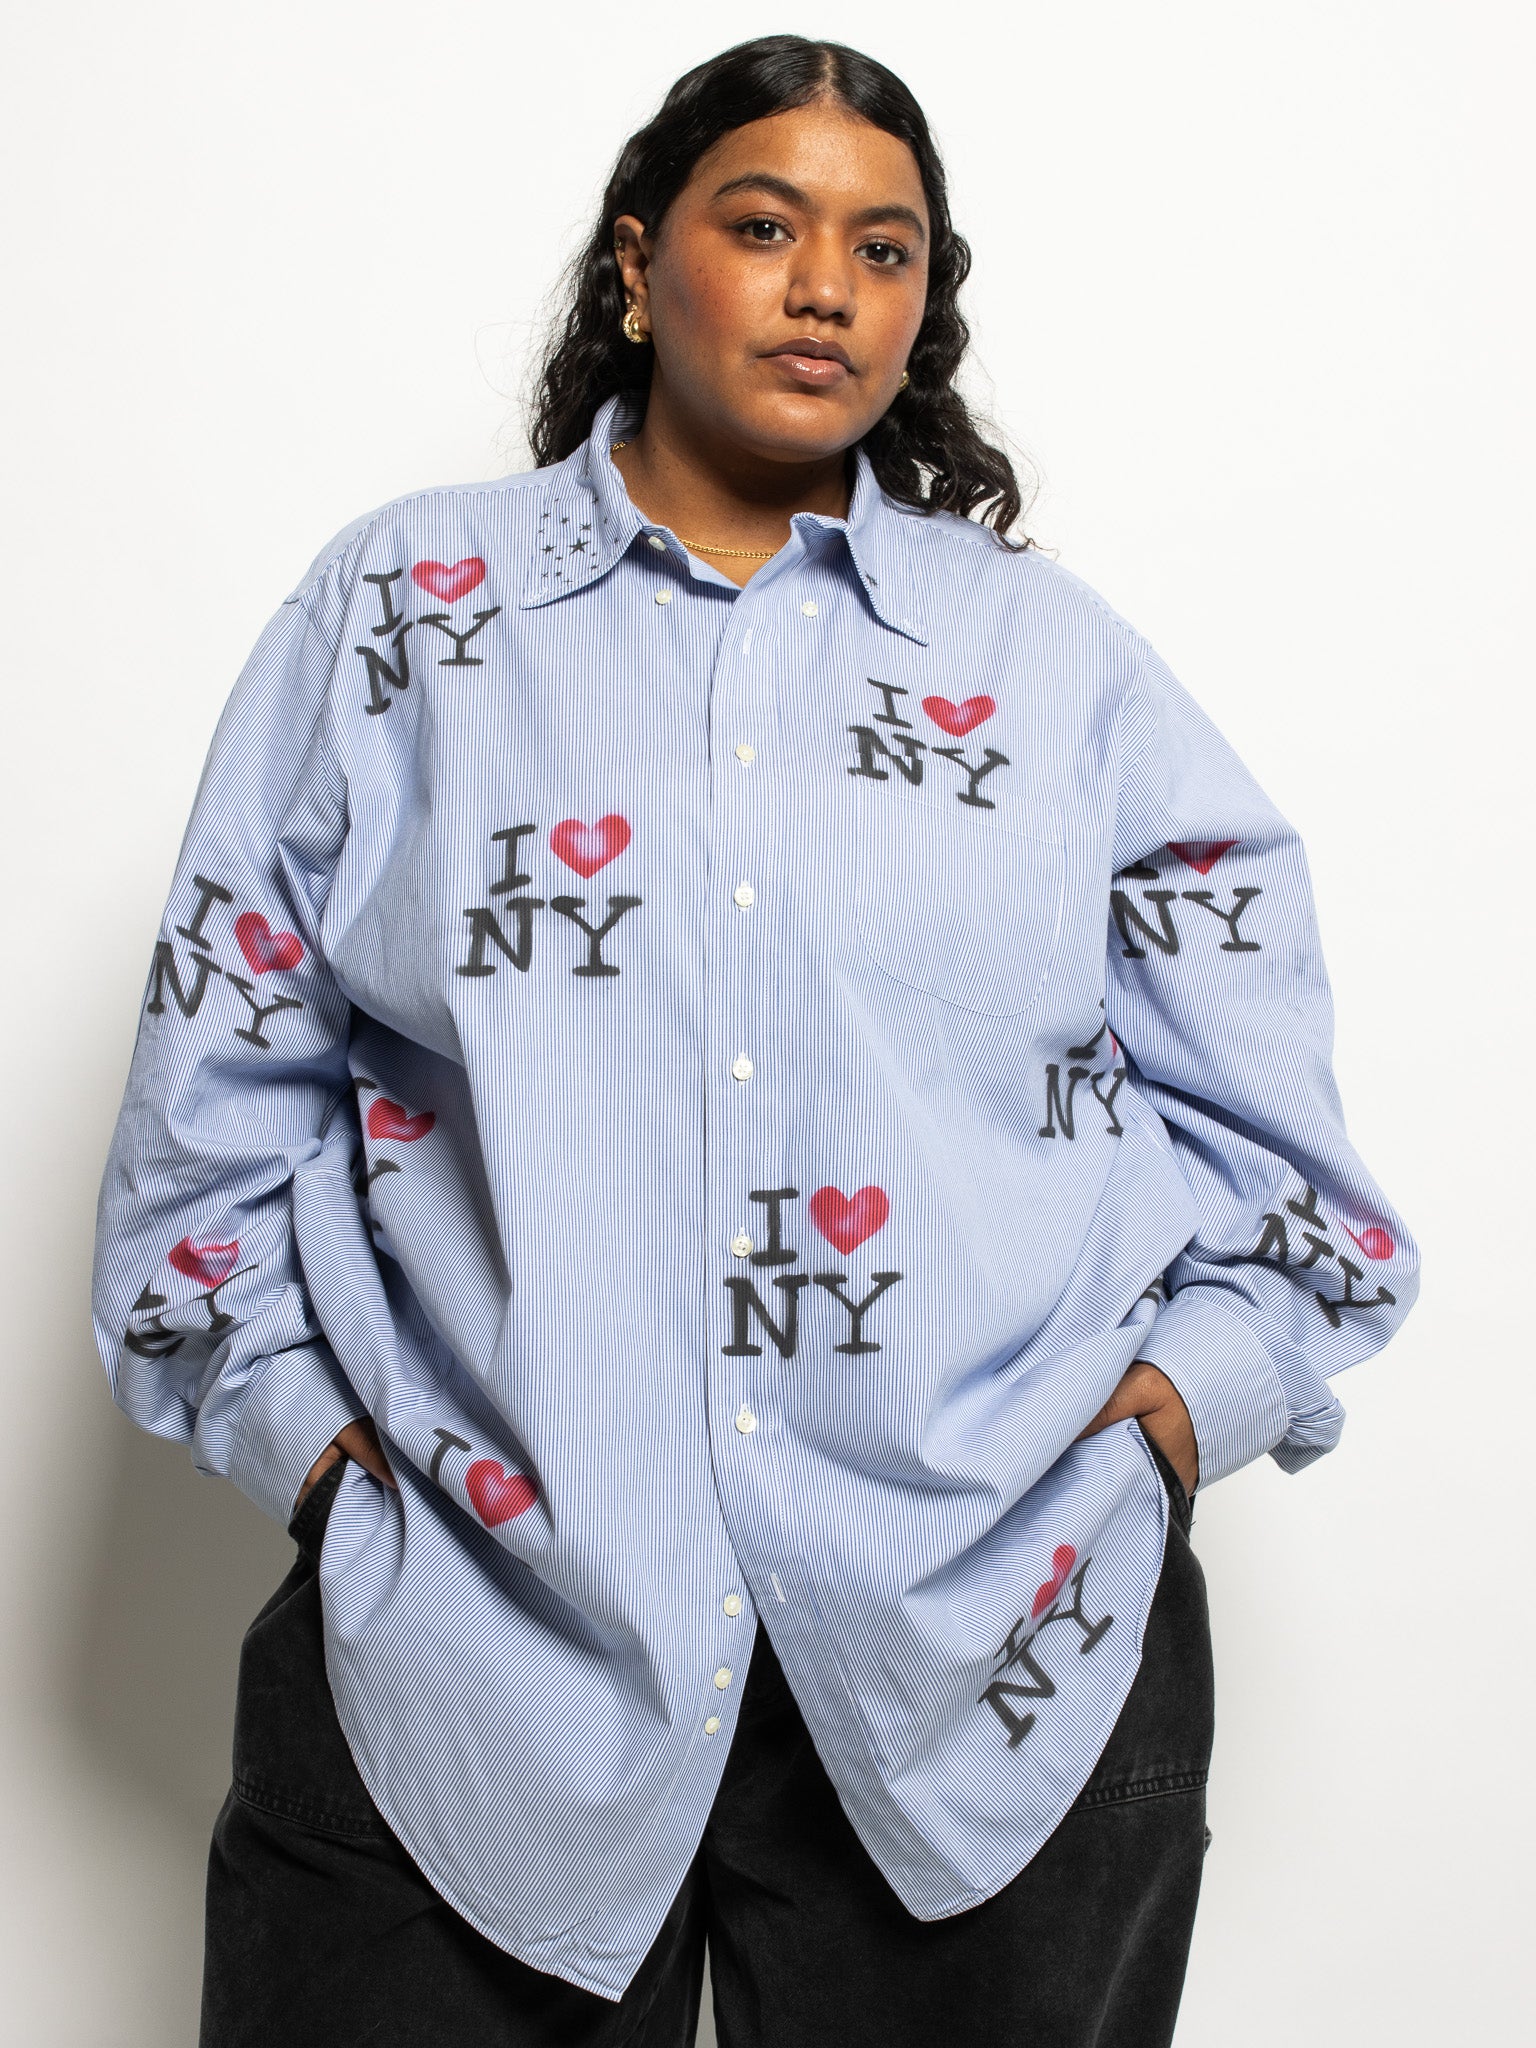 Femlord x BRZ - "I Love NY" Pinstripe Button Up (4X)